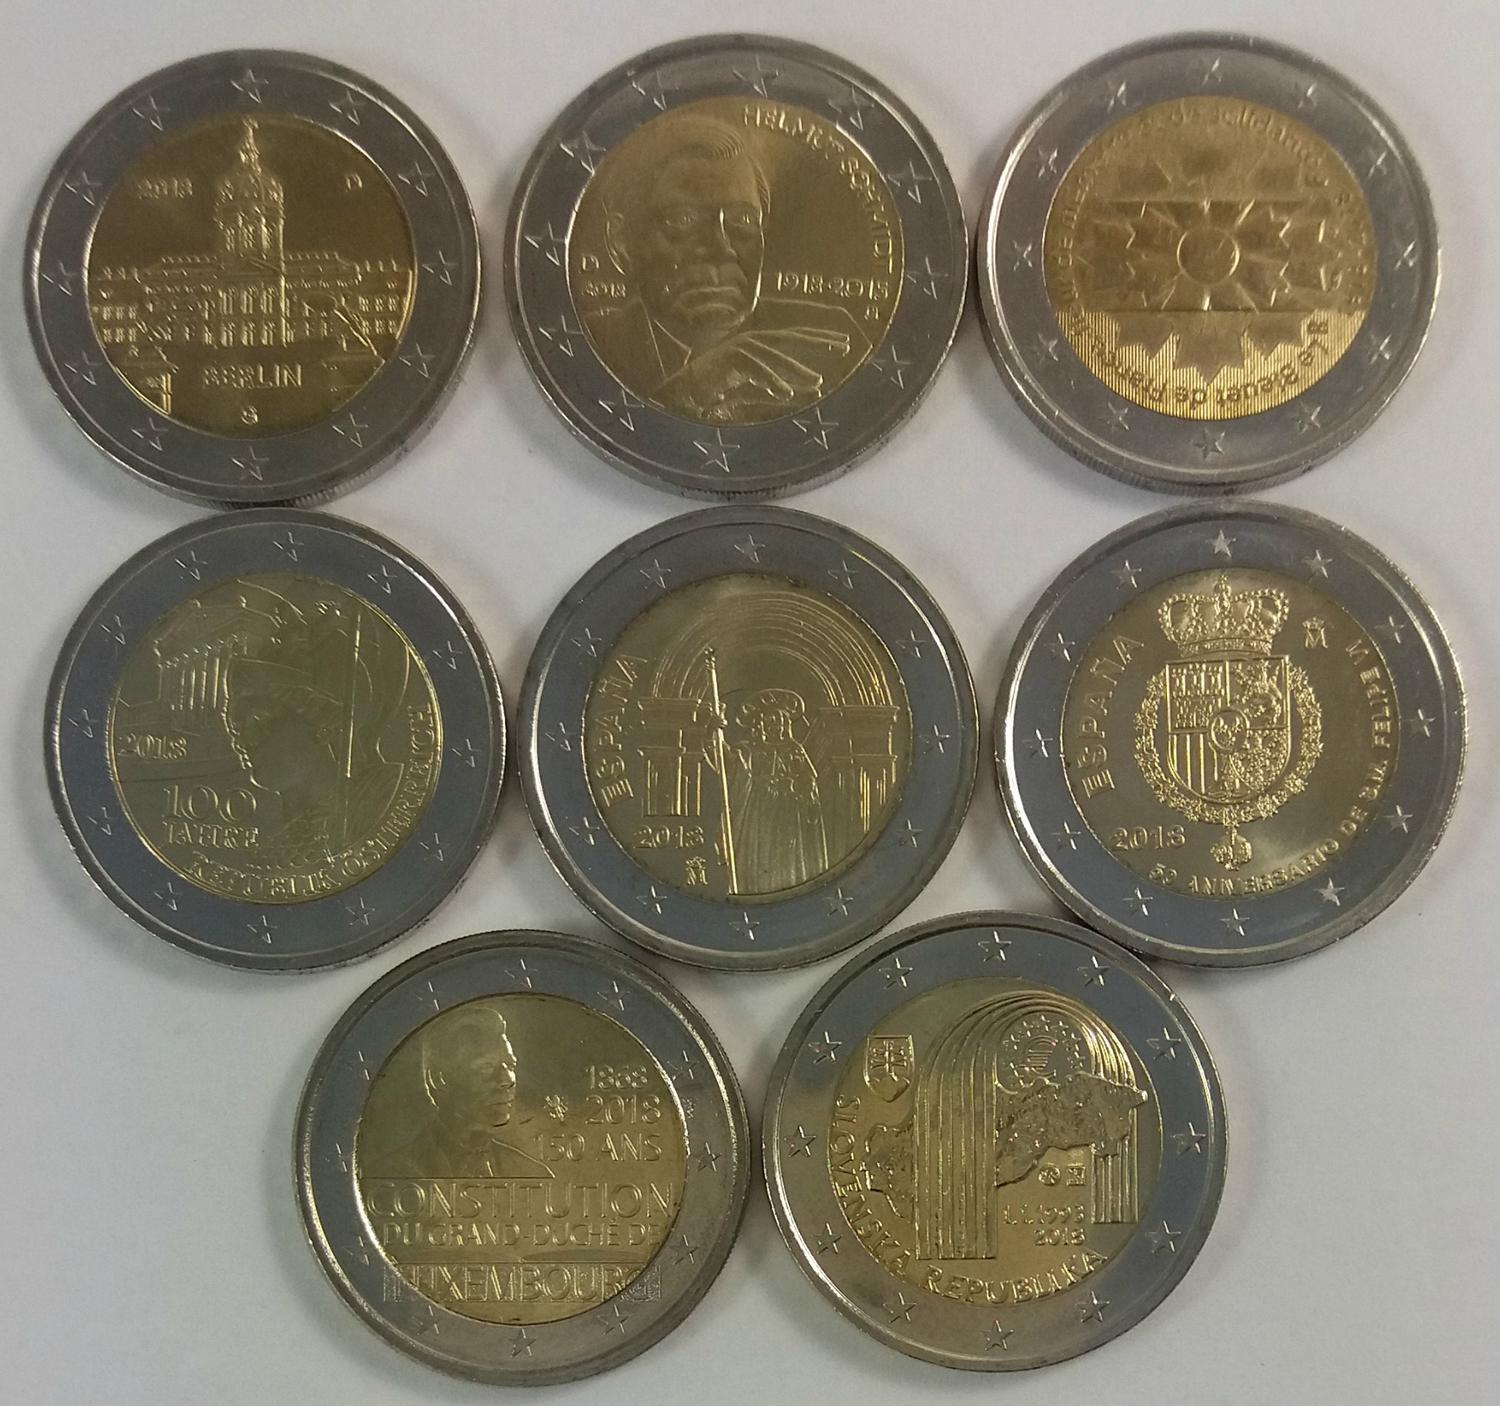 All UNC 10 Coins from 10 Countries Africa Coin Mix